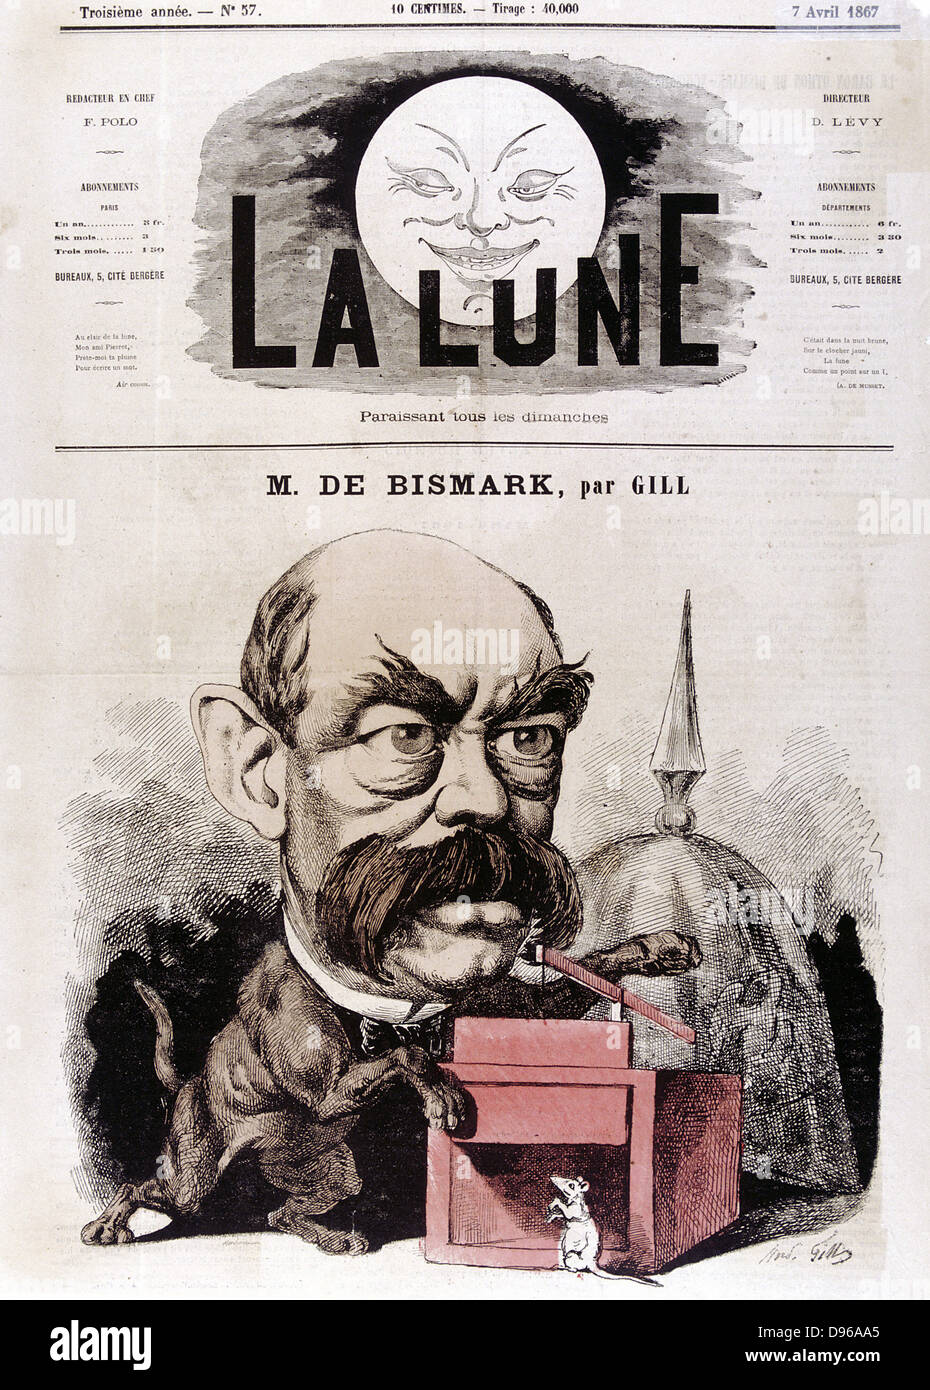 Otto von Bismarck (1815-1904) Prussian (German) statesman. Chancellor of new German empire 1866-1890. Gill cartoon published in 'La Lune' Paris 1867 showing Bismarck as cat with mousetrap. Coloured engraving Stock Photo